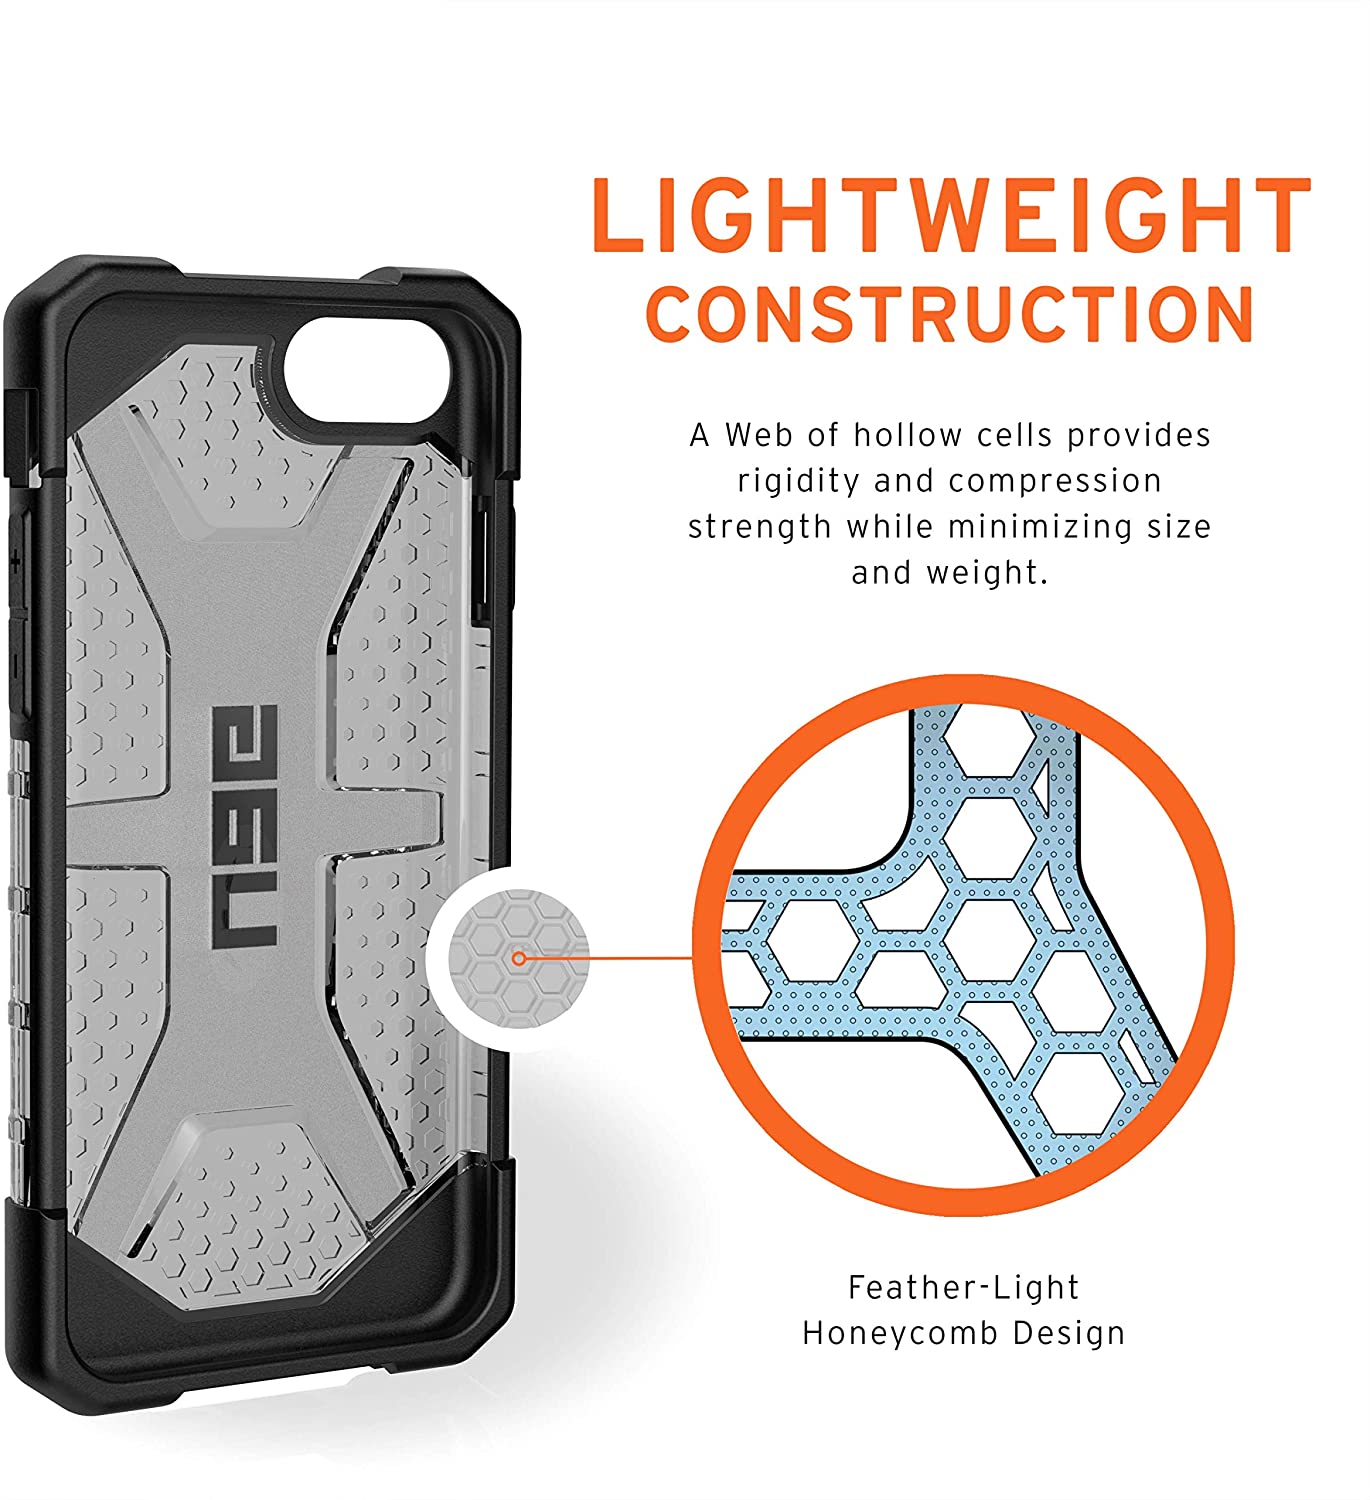 UAG Designed for iPhone SE 2020 Case Plasma Rugged Translucent Ultra-Thin Military Drop Tested Protective Cover